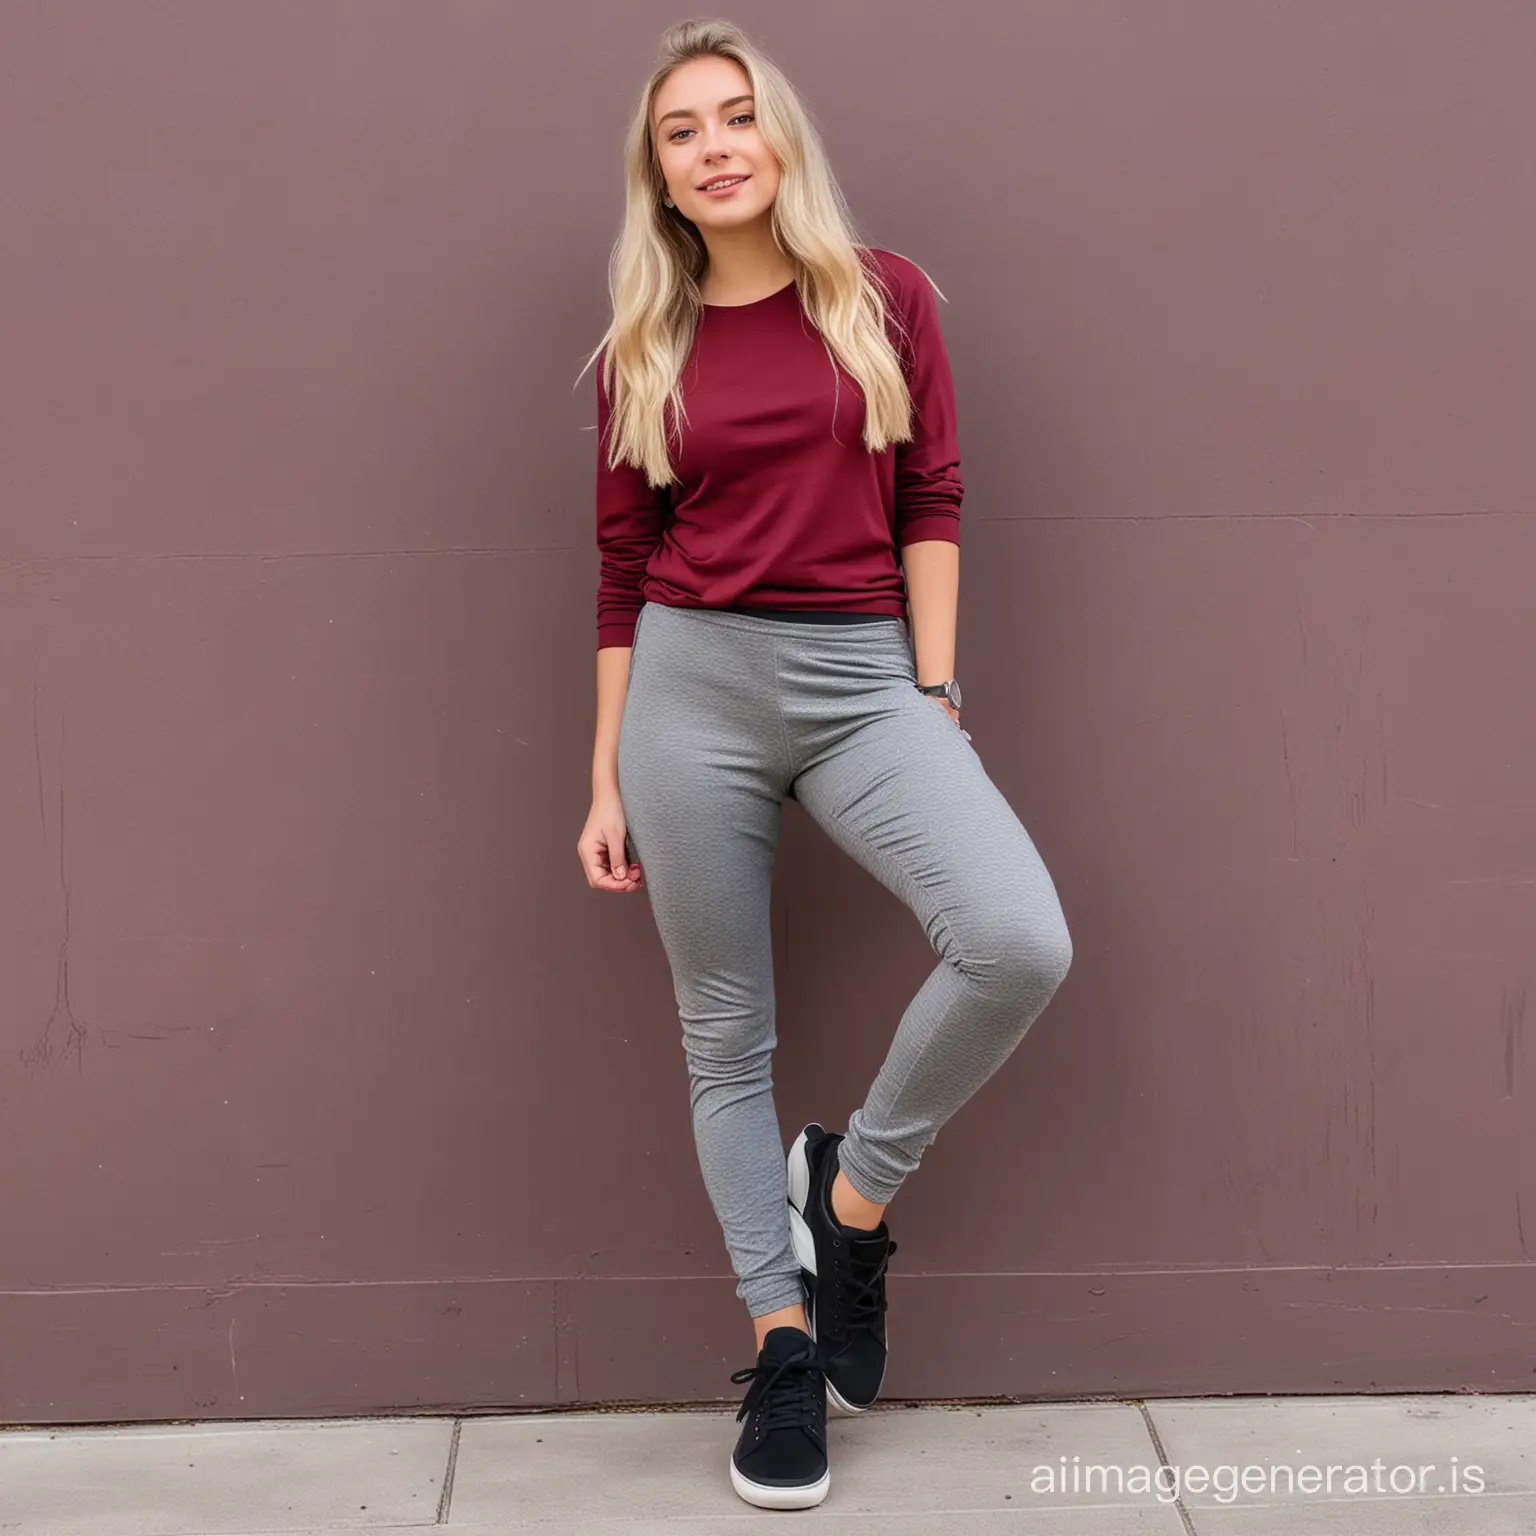 Gorgeous fifteen years old blonde girl in heather gray leggings with burgundy colour blouse and black sneakers